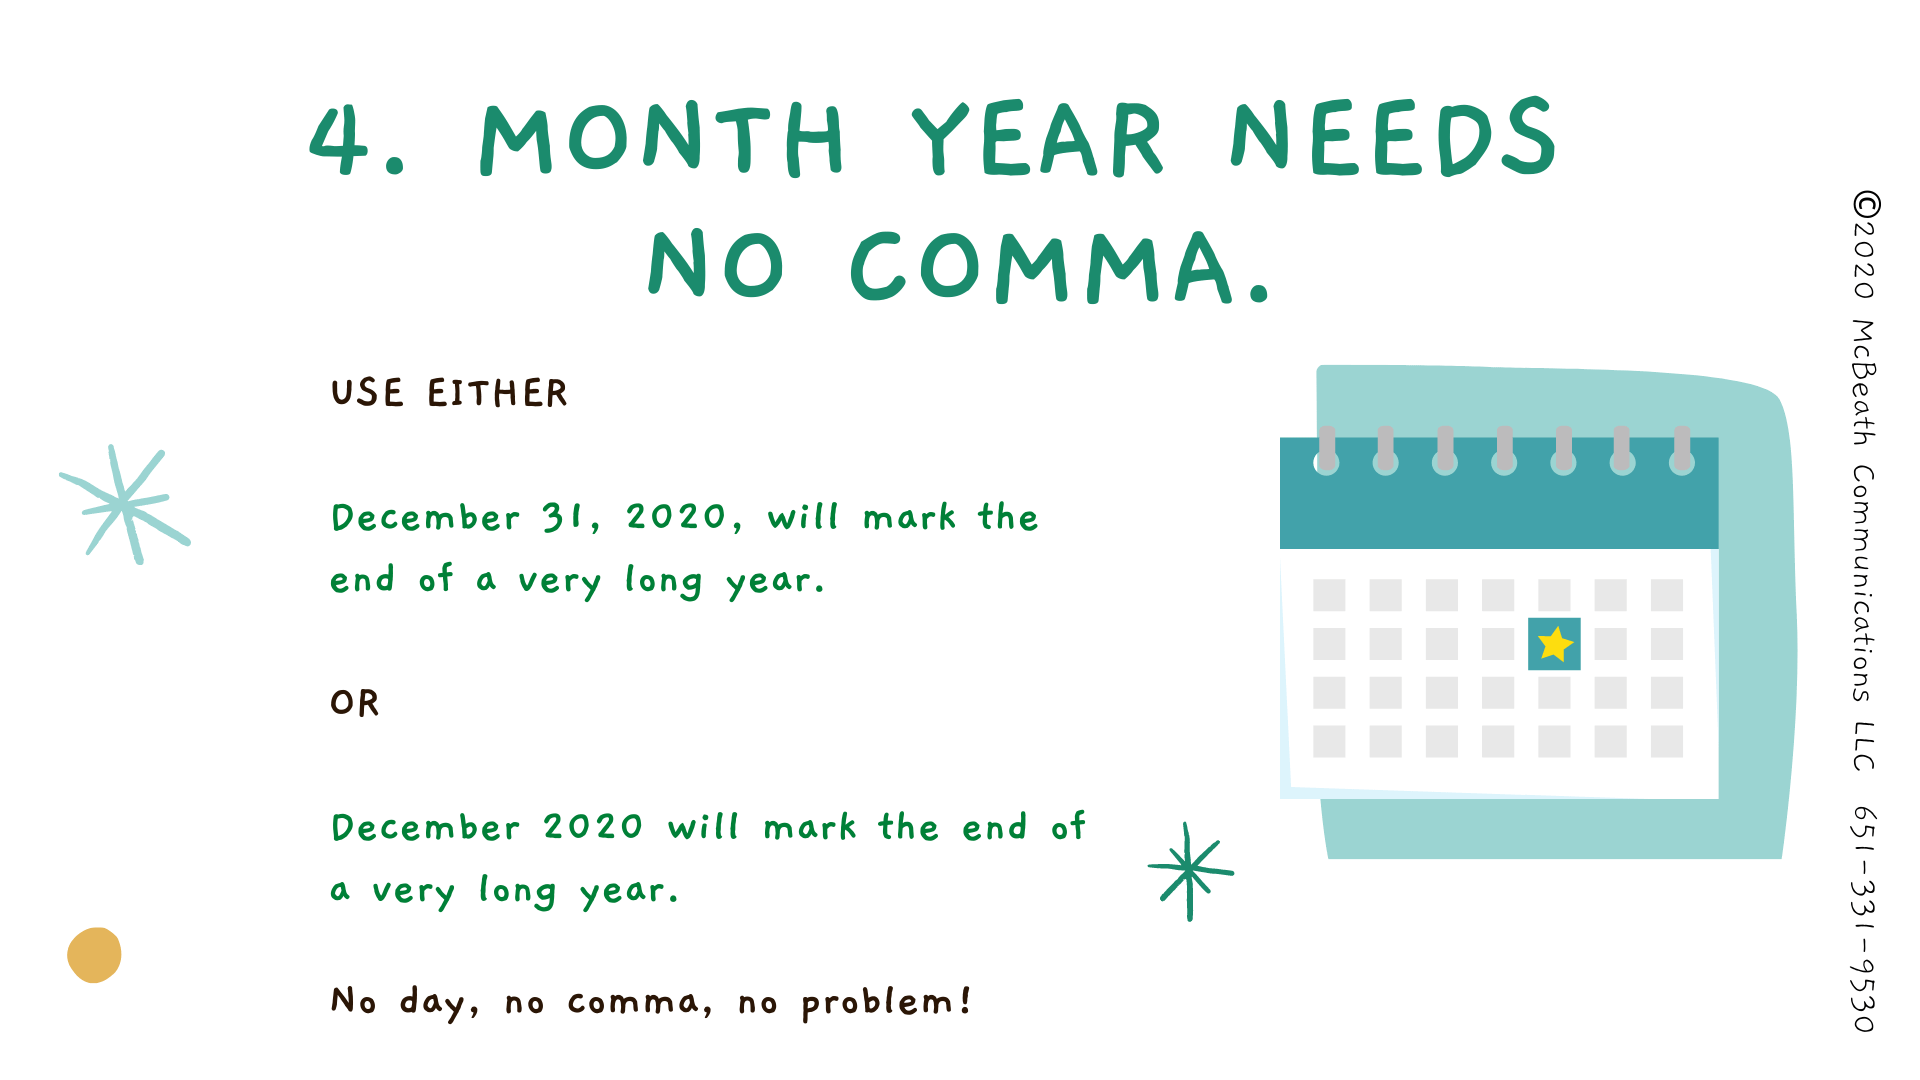 Month Year needs no comma